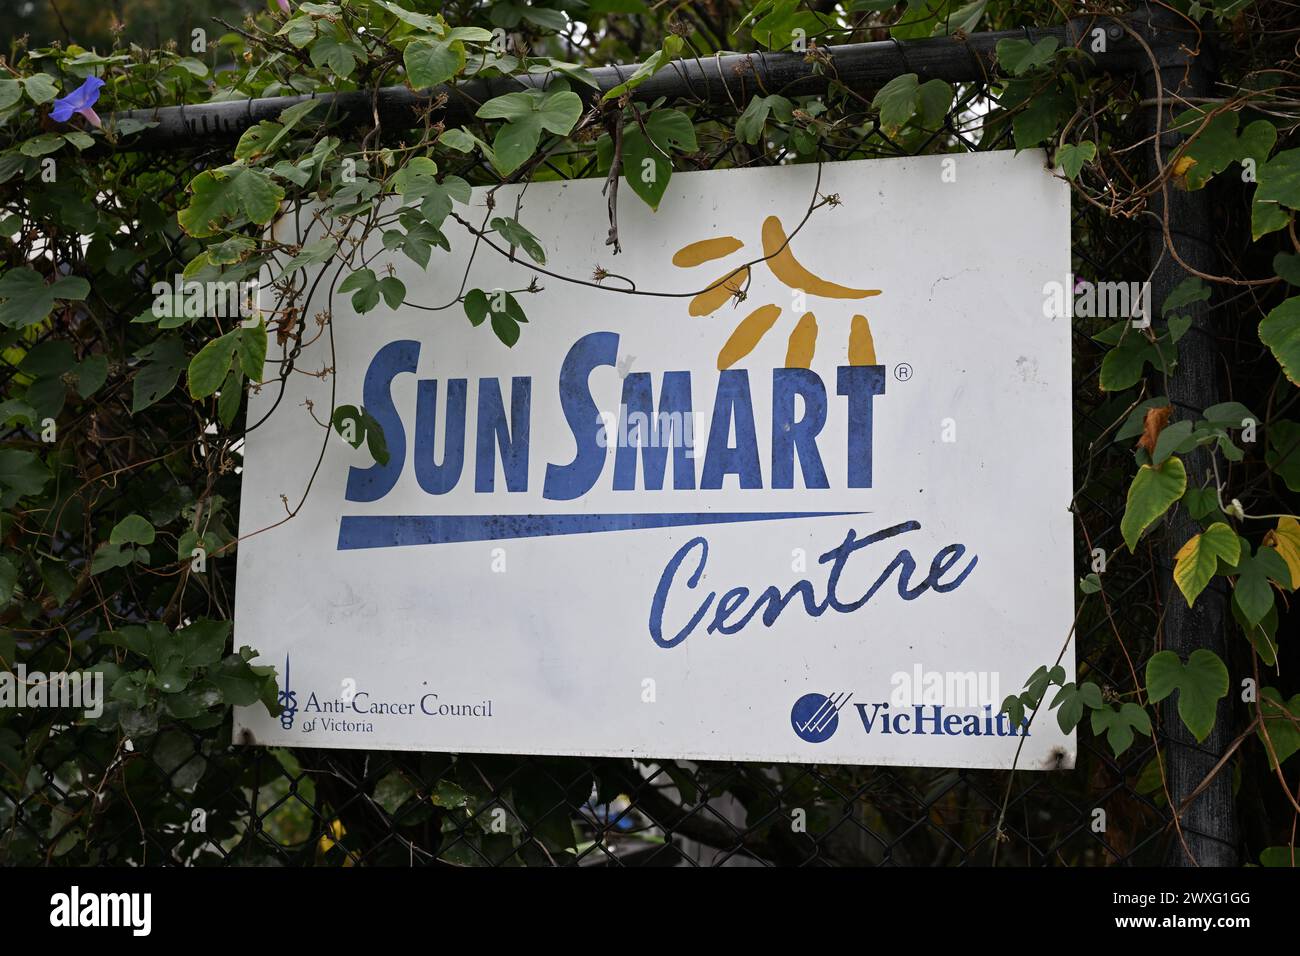 Partially obscured white Sun Smart Centre sign from the Anti-Cancer Council of Victoria and VicHealth, attached to a black chain link fence Stock Photo